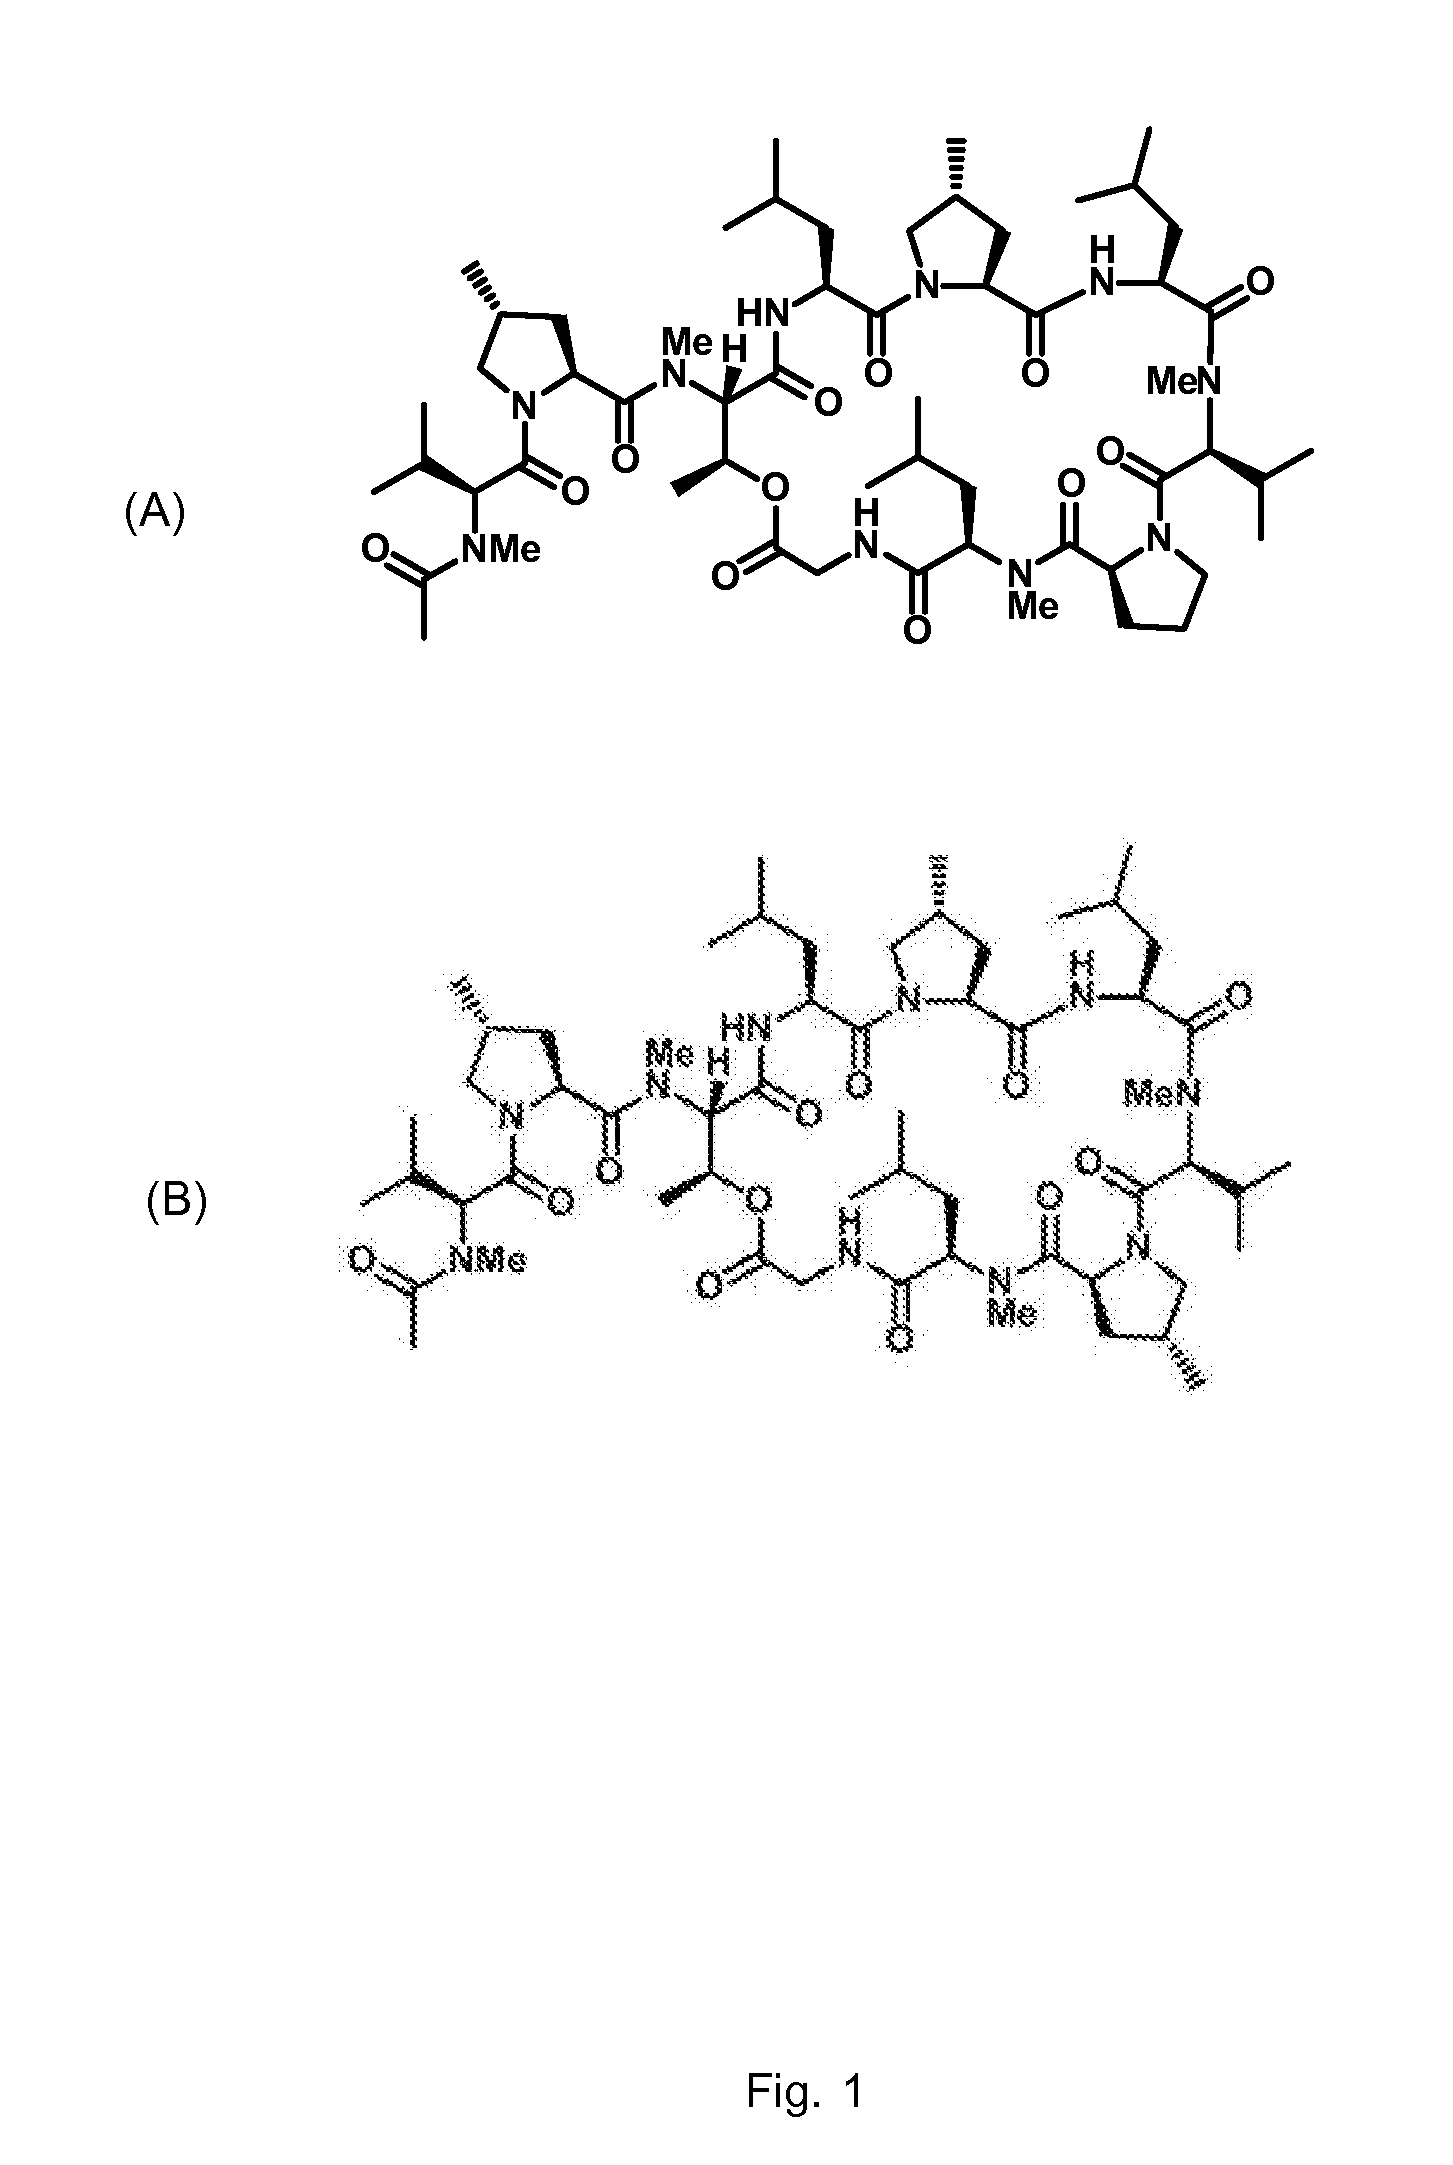 Gene cluster for biosynthesis of griselimycin and methylgriselimycin